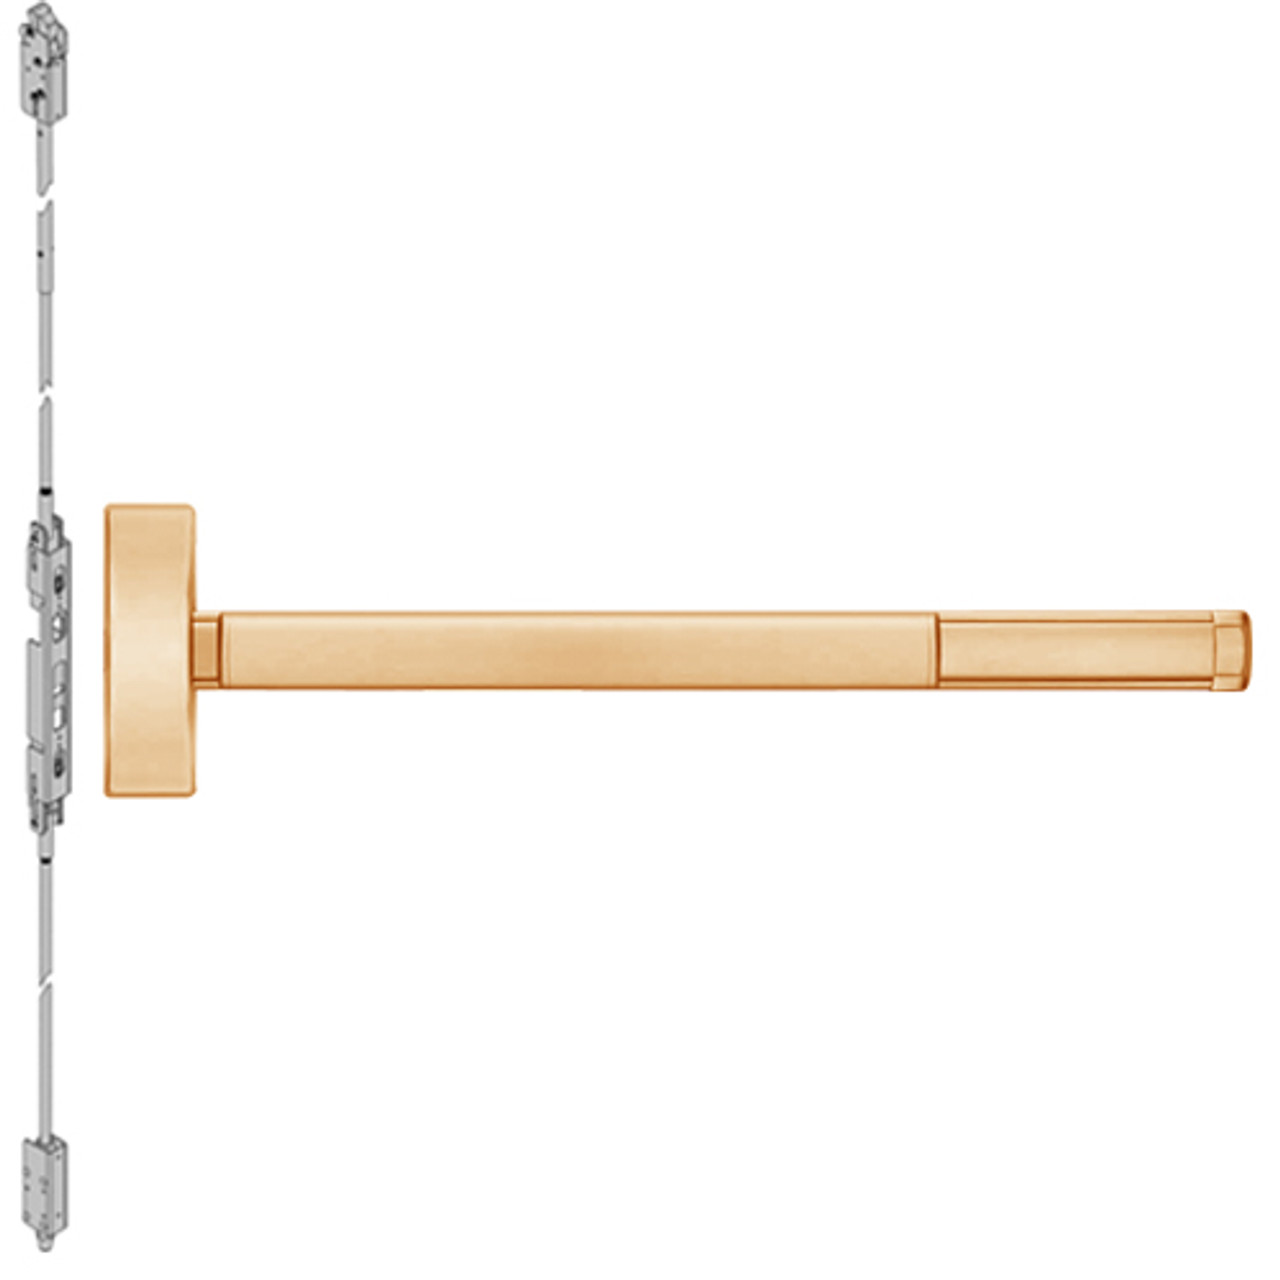 ELRFL2815LBR-612-36 PHI 2800 Series Fire Rated Concealed Vertical Rod Exit Device with Electric Latch Retraction Prepped for Thumbpiece Always Active in Satin Bronze Finish